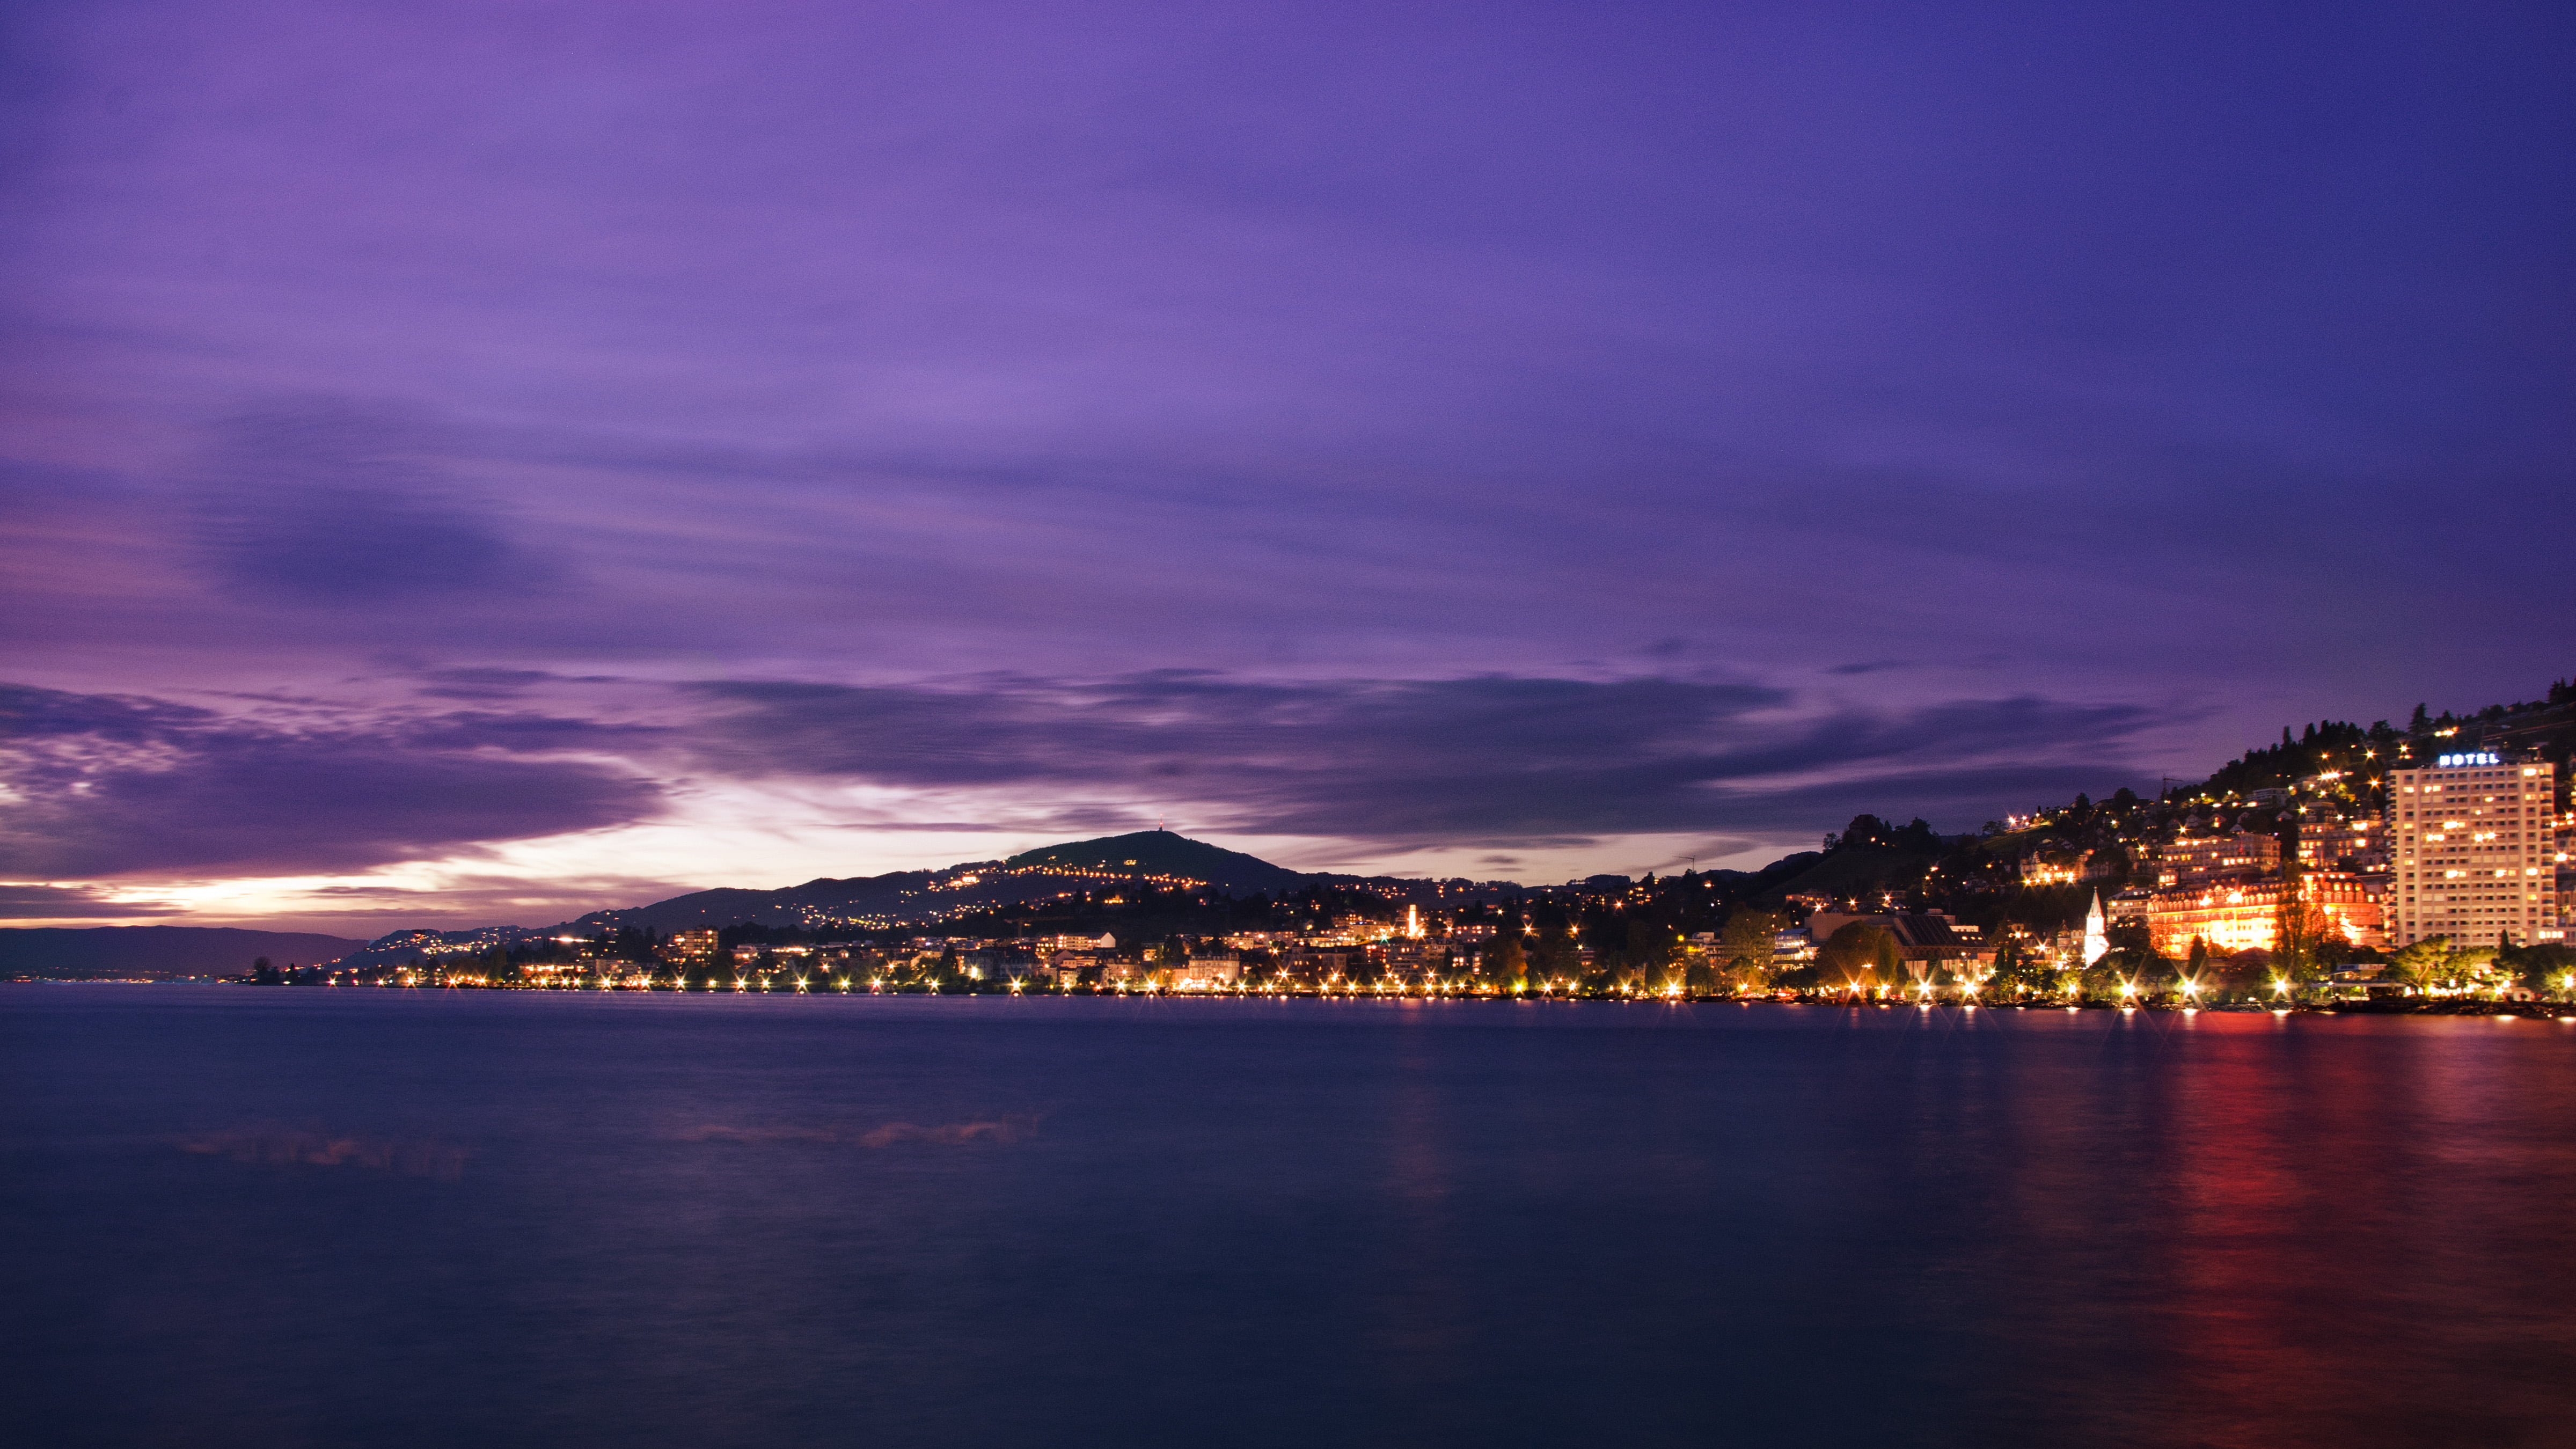 purple and white skies and City with Lights, montreux, montreux